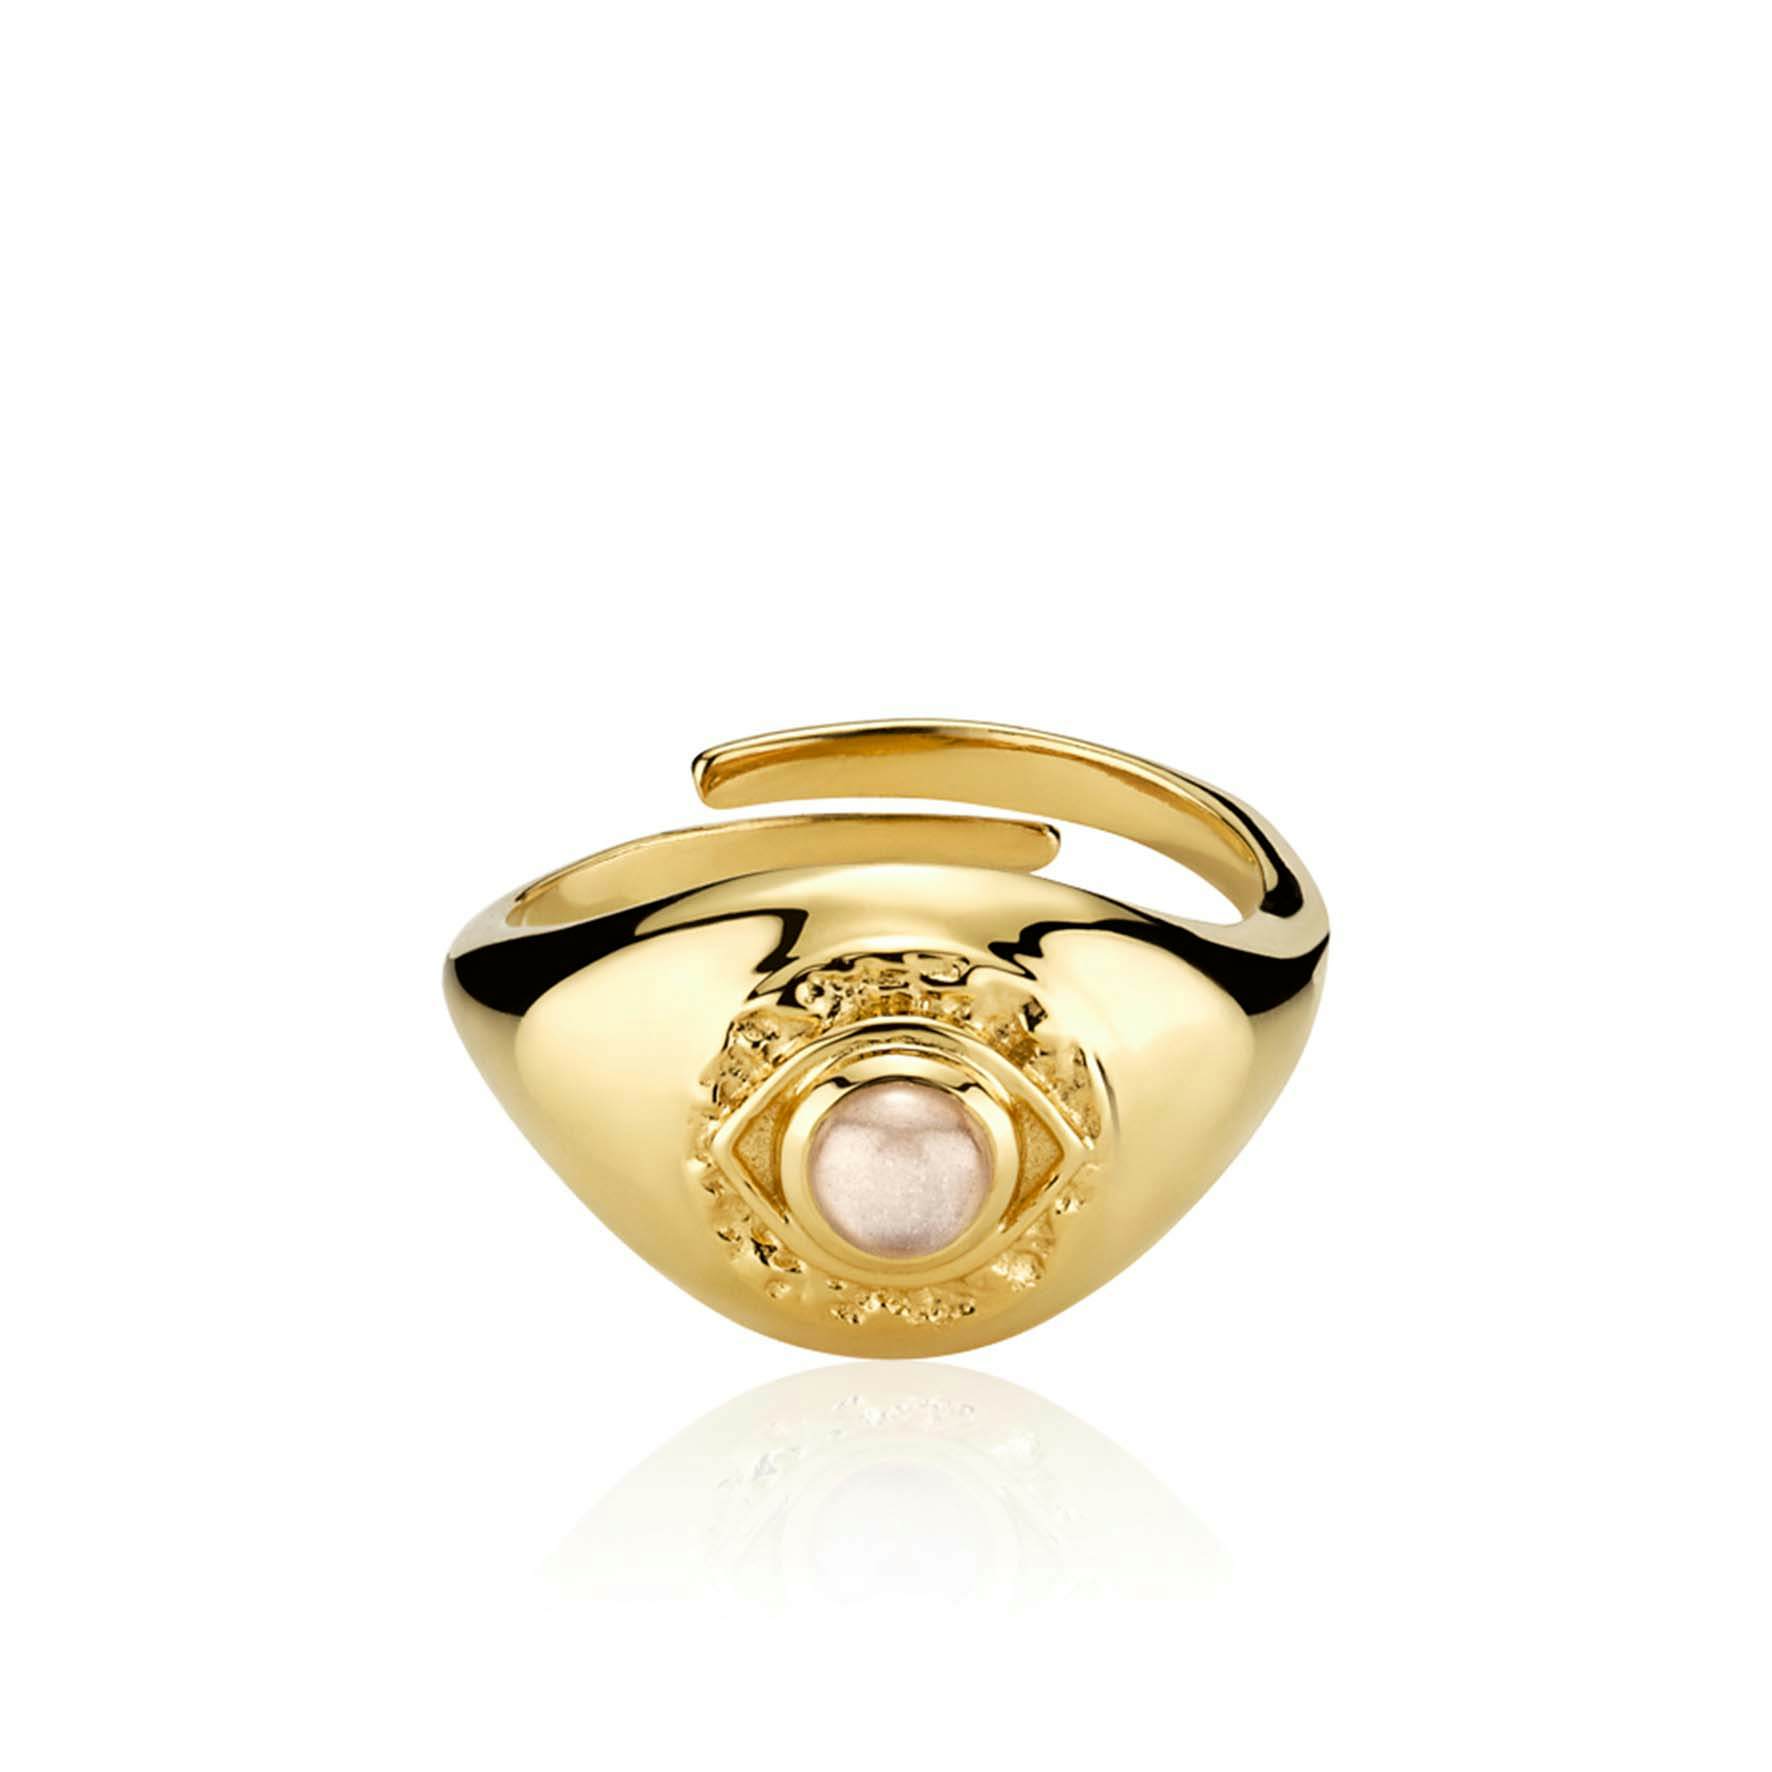 Hanna Martine by Sistie Ring from Sistie in Goldplated-Silver Sterling 925||Blank